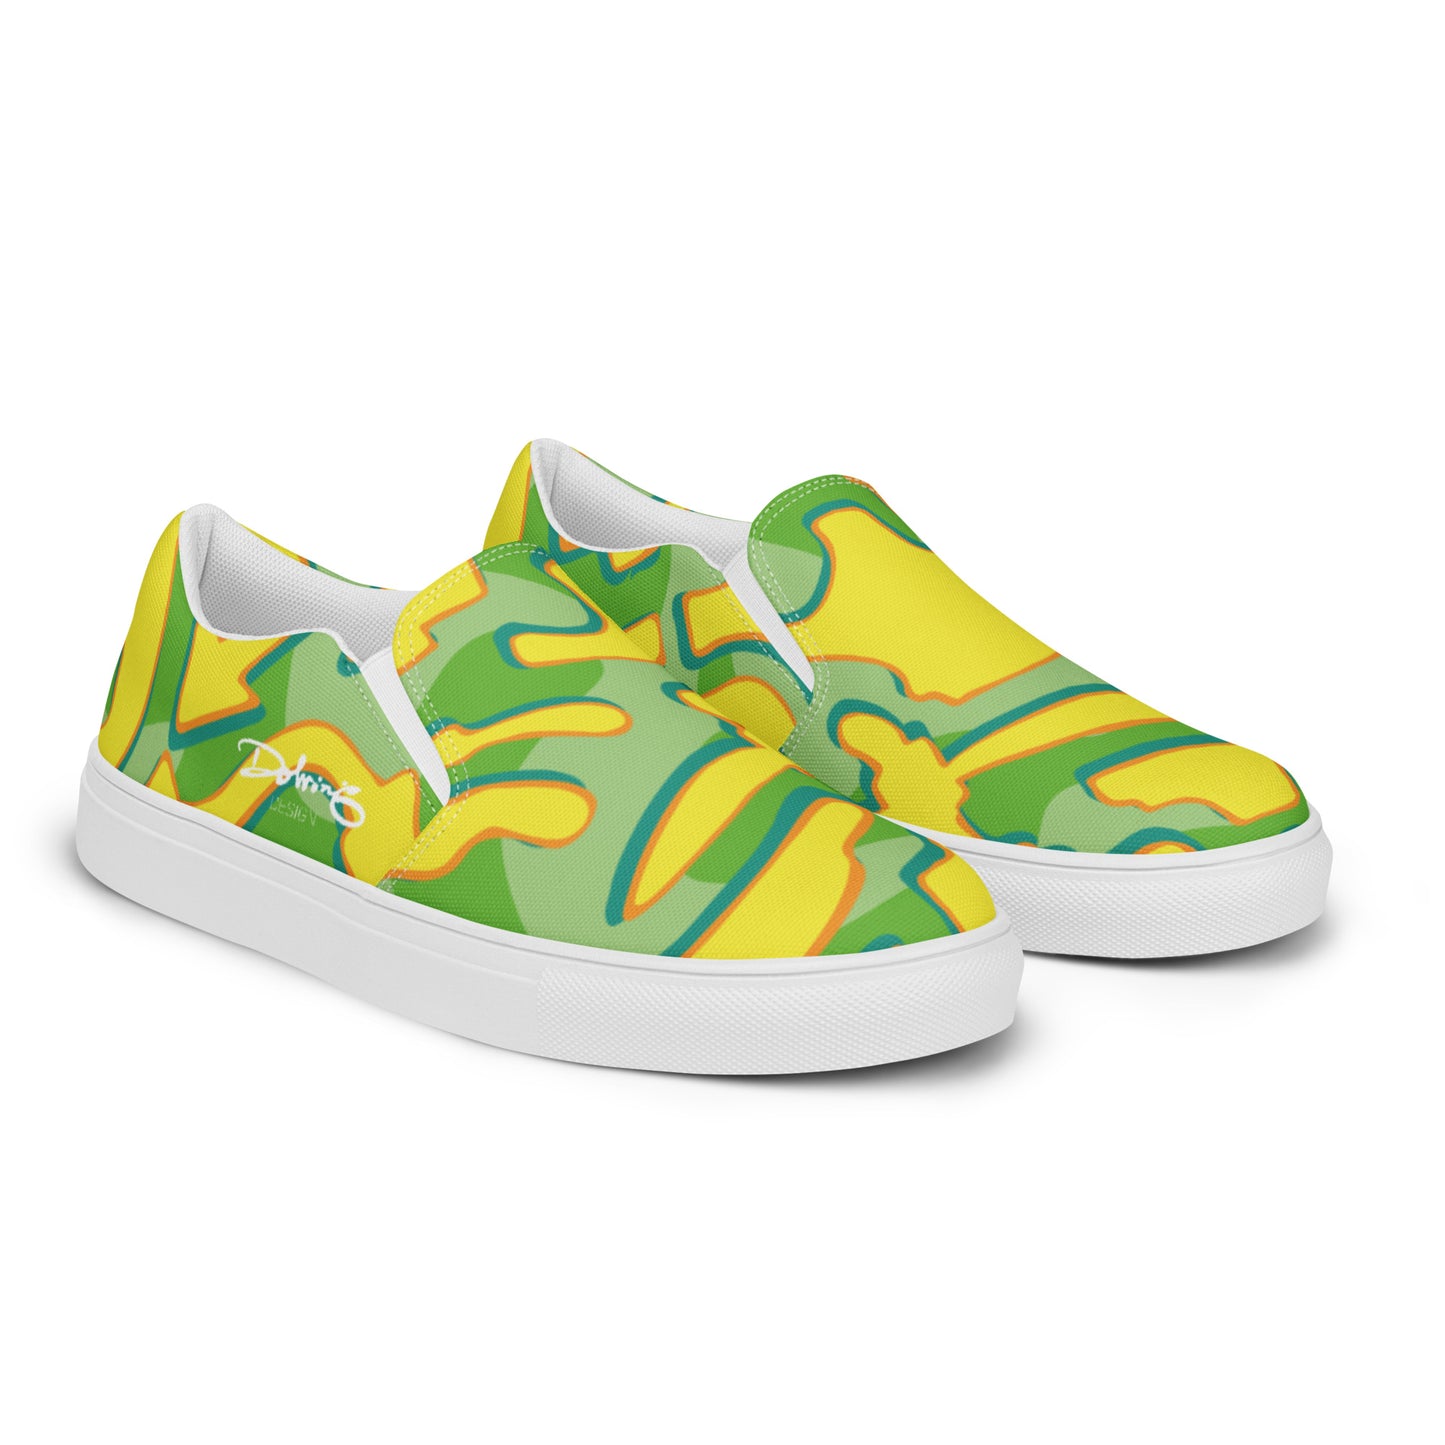 BLIMEY LIMEY by DOLVING - Women’s slip-on canvas shoes